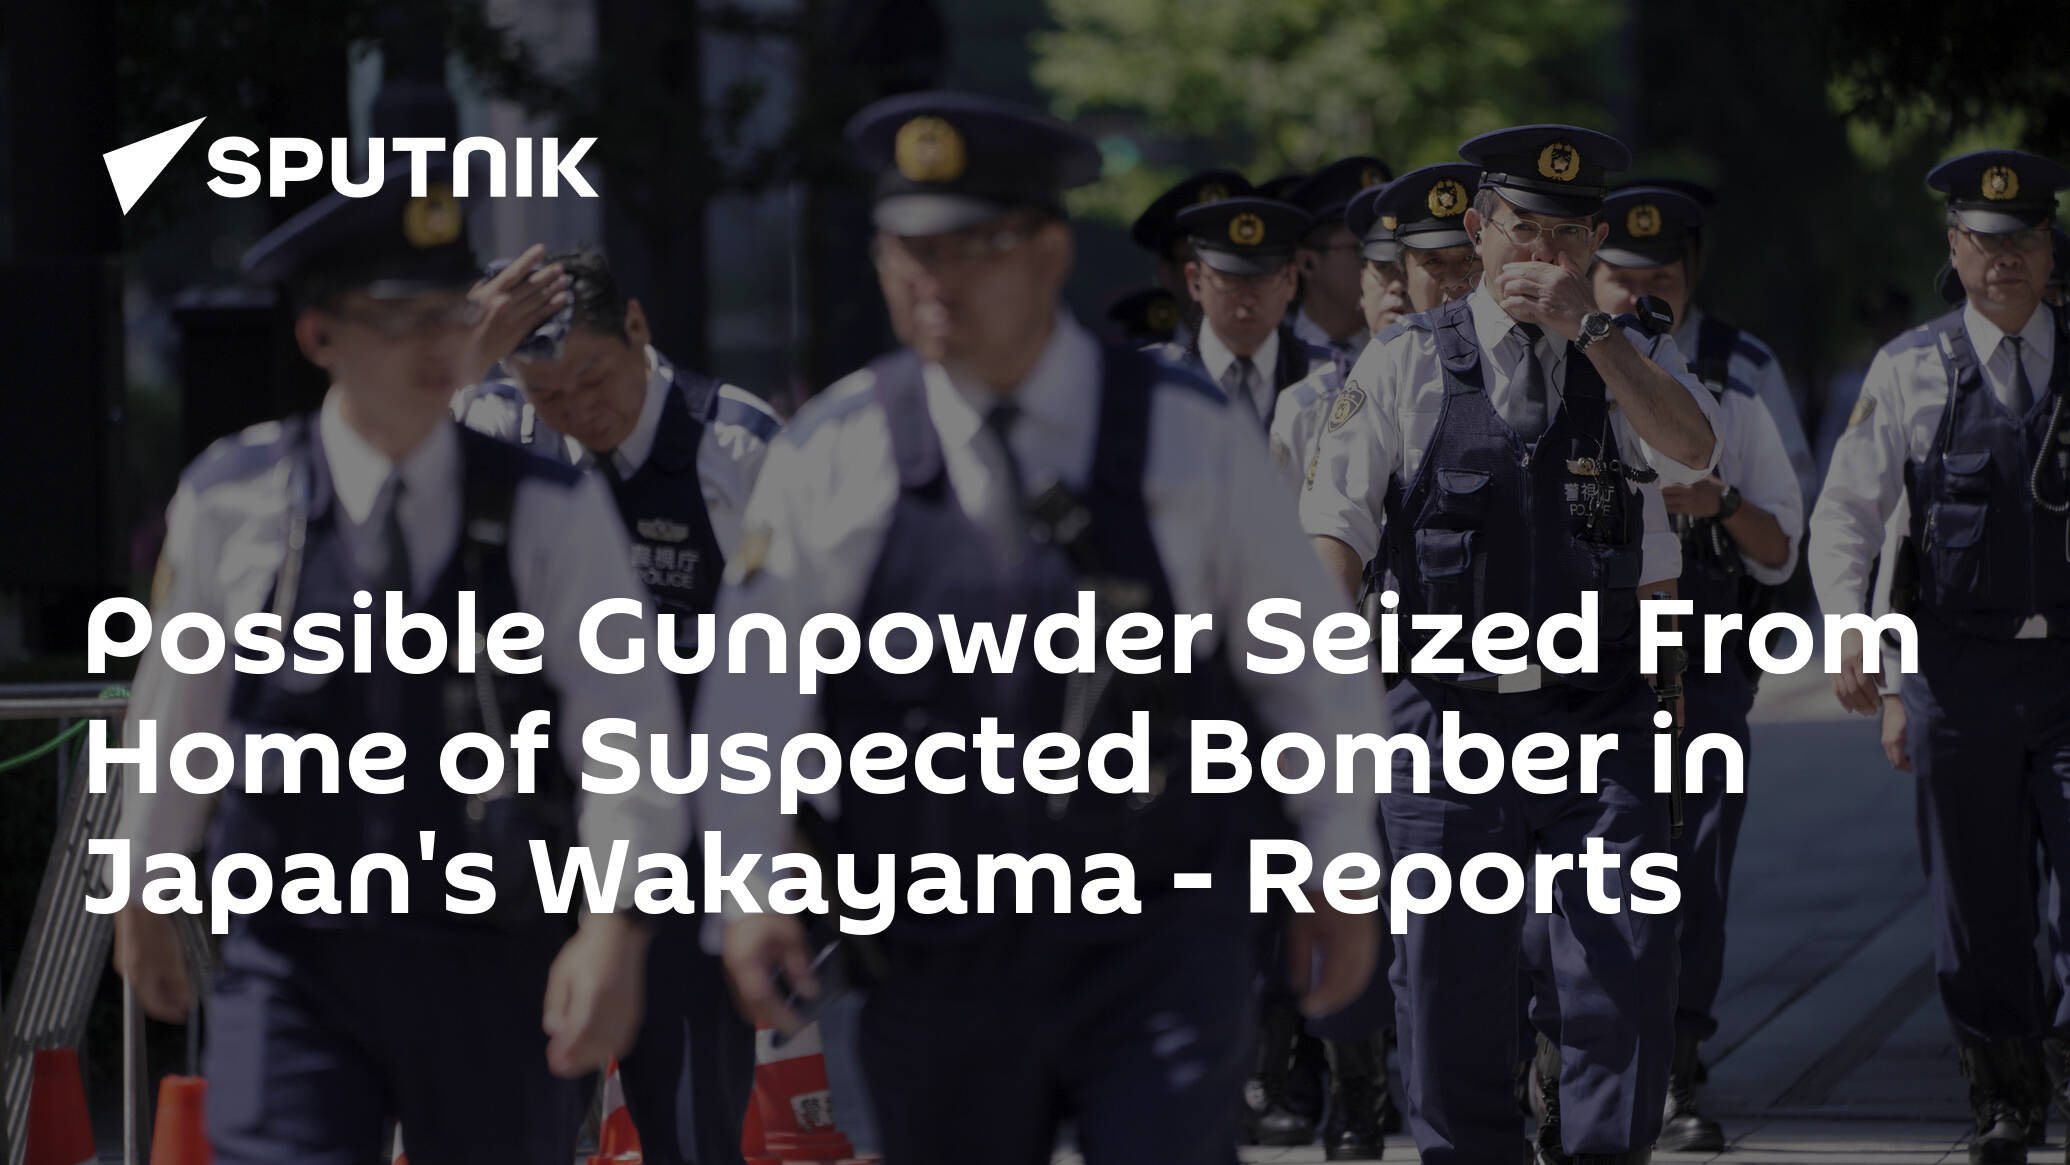 Possible Gunpowder Seized From Home of Suspected Bomber in Japan's Wakayama – Reports